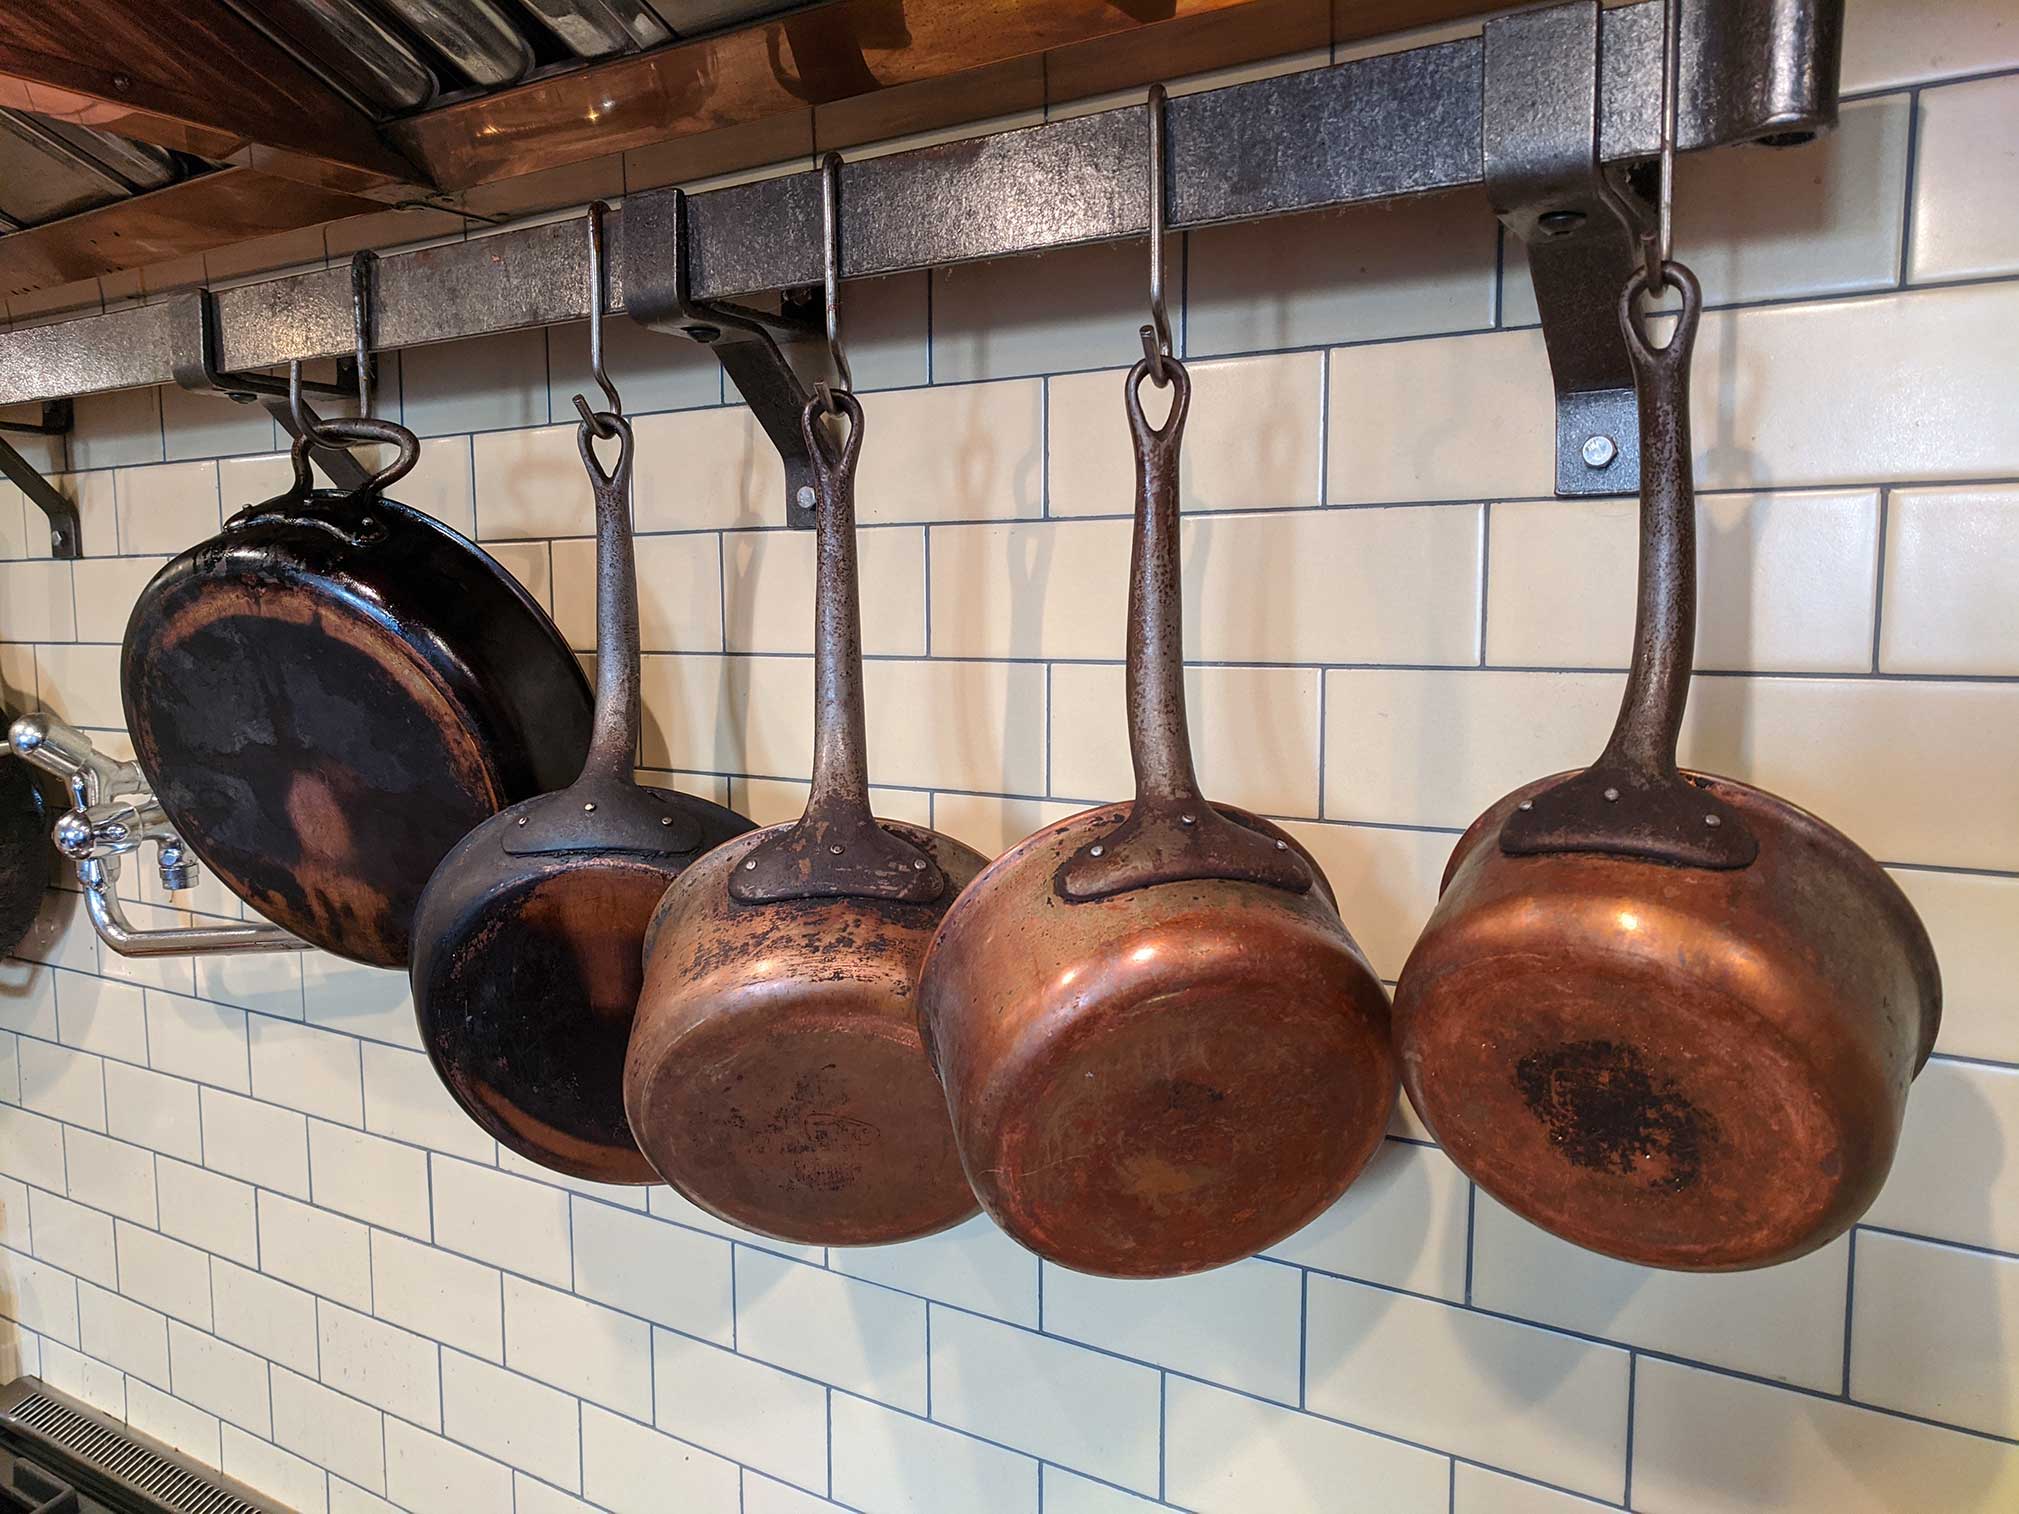 Copper Cookware Made in the USA - A KD Juicy Post : Kitchen Detail